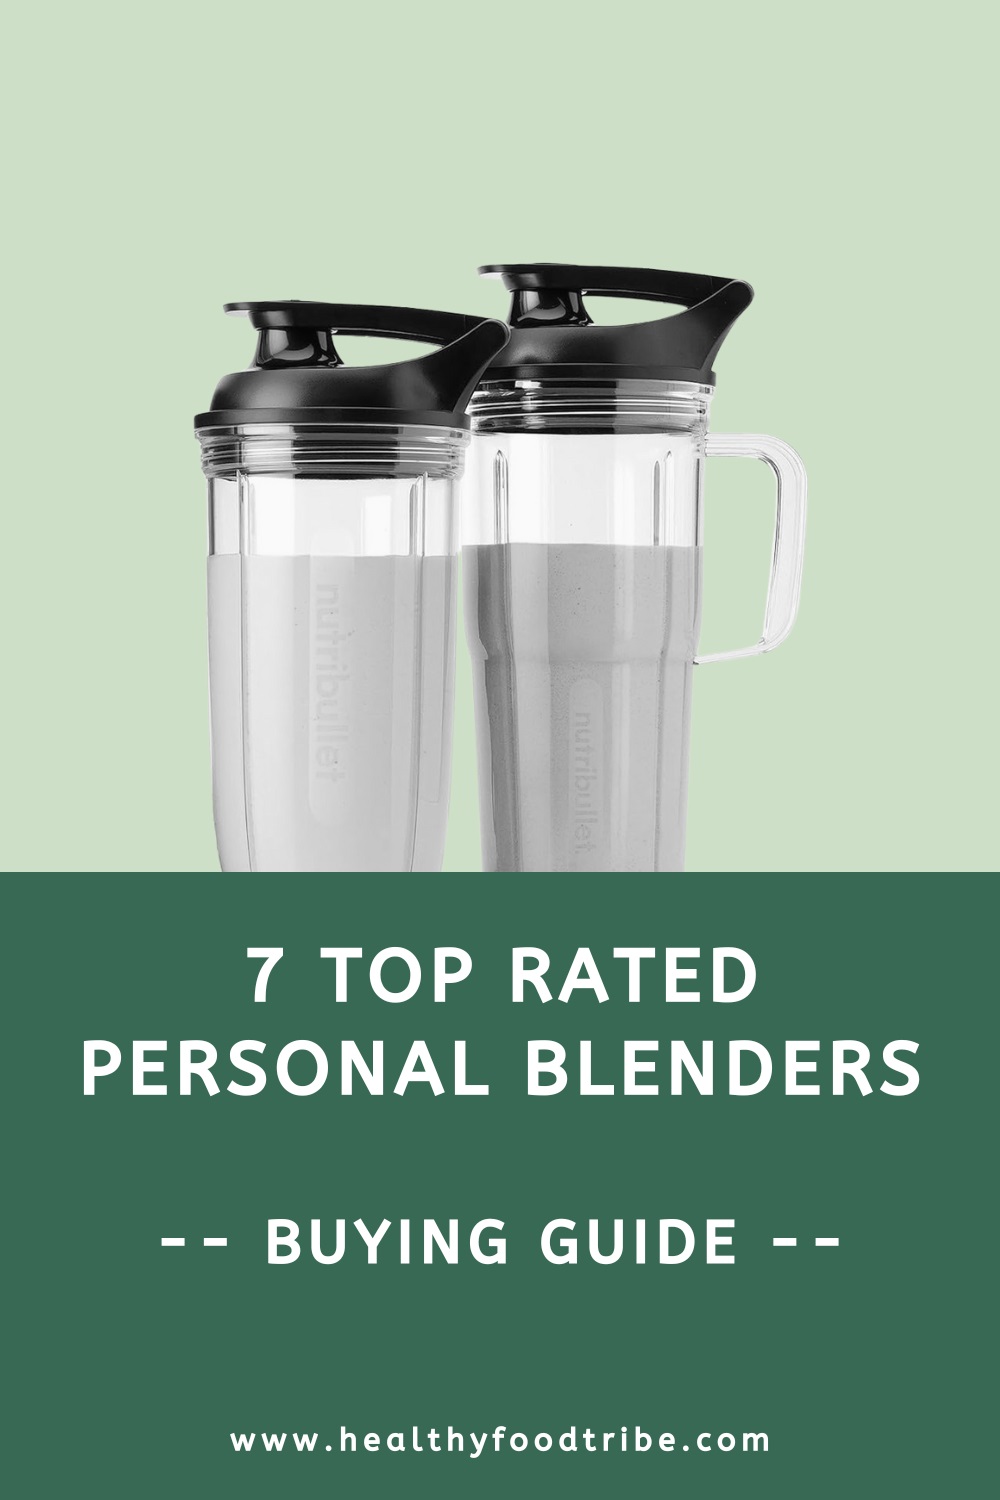 7 Top rated single serve personal blenders (buying guide)